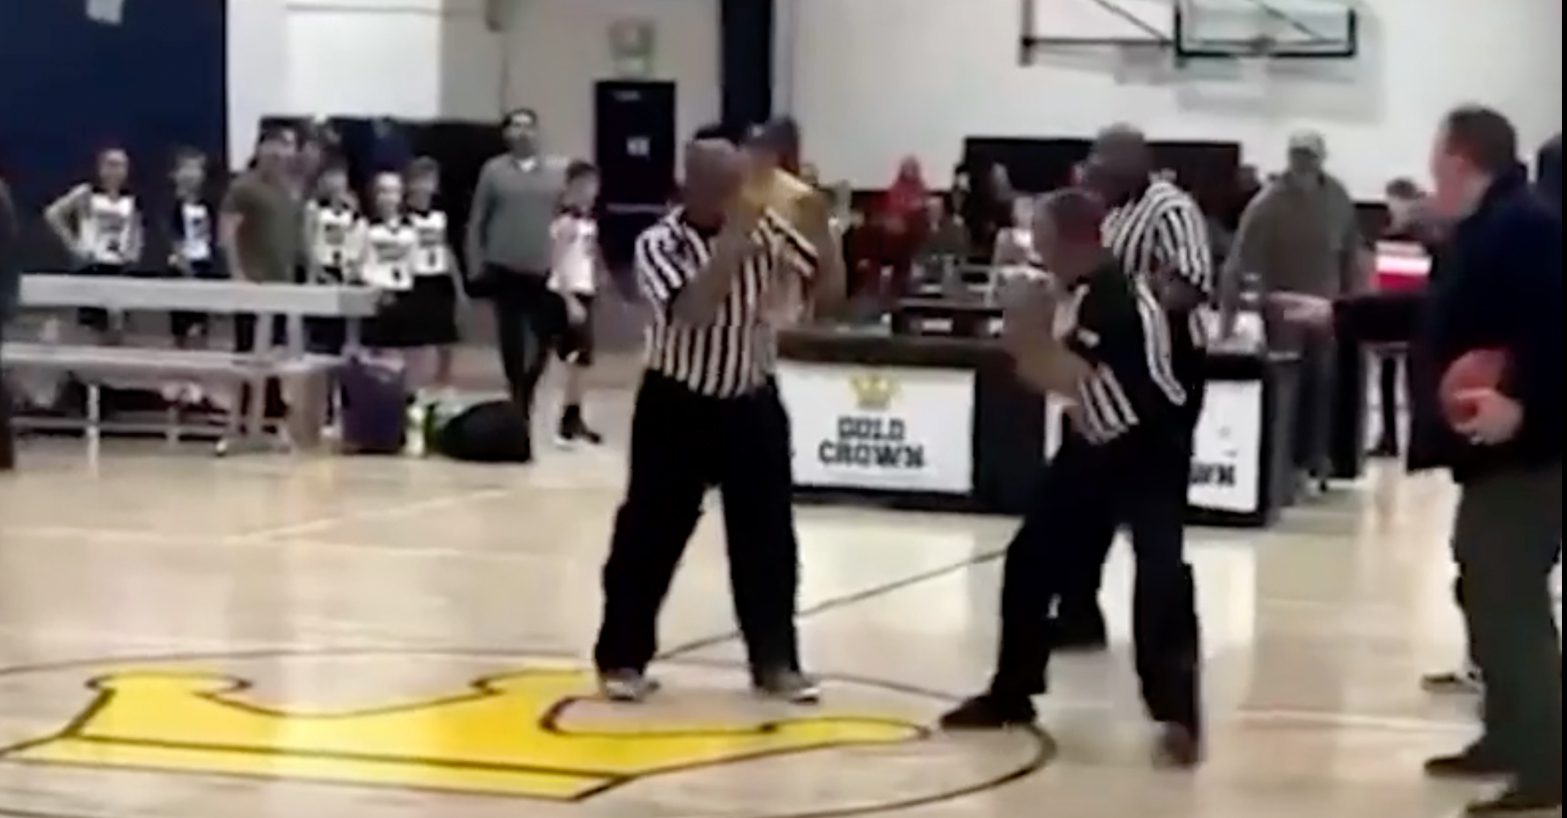 Refs Start Fighting Each Other in Middle of Youth Basketball Game